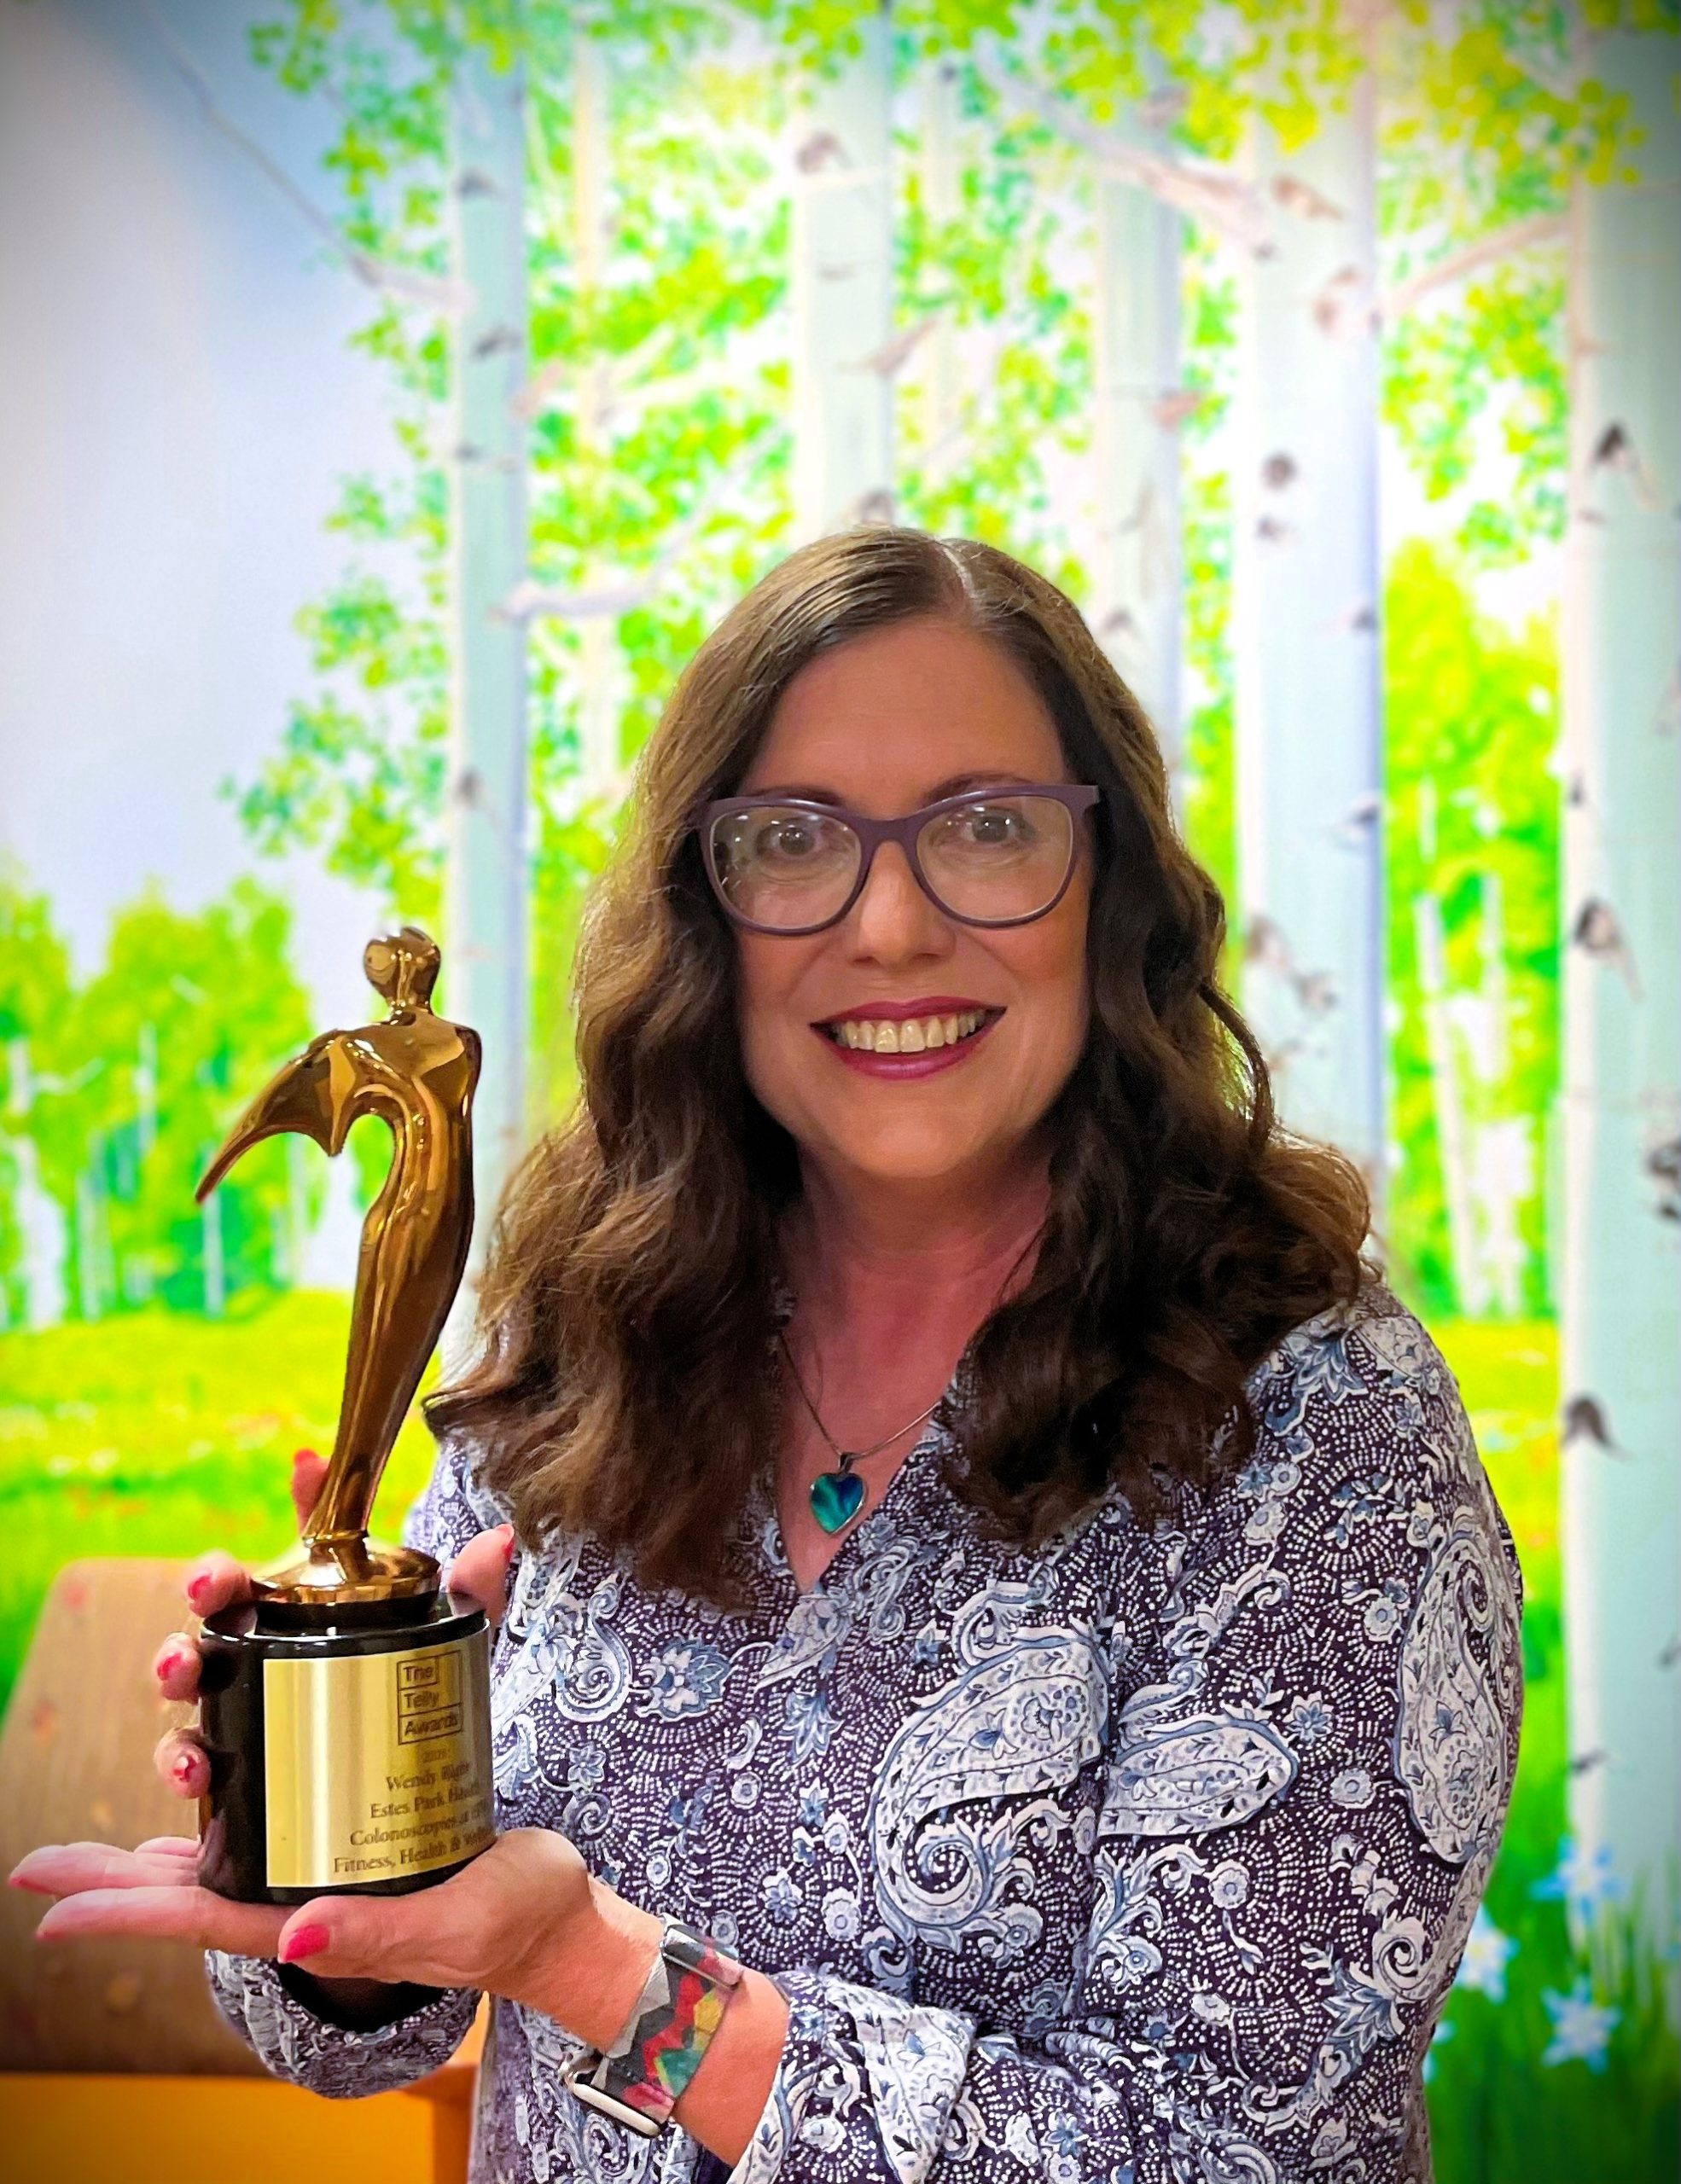 A woman with glasses and long brown hair, wearing a patterned blouse, smiles while holding a golden trophy. A colorful backdrop of trees and greenery is visible behind her.